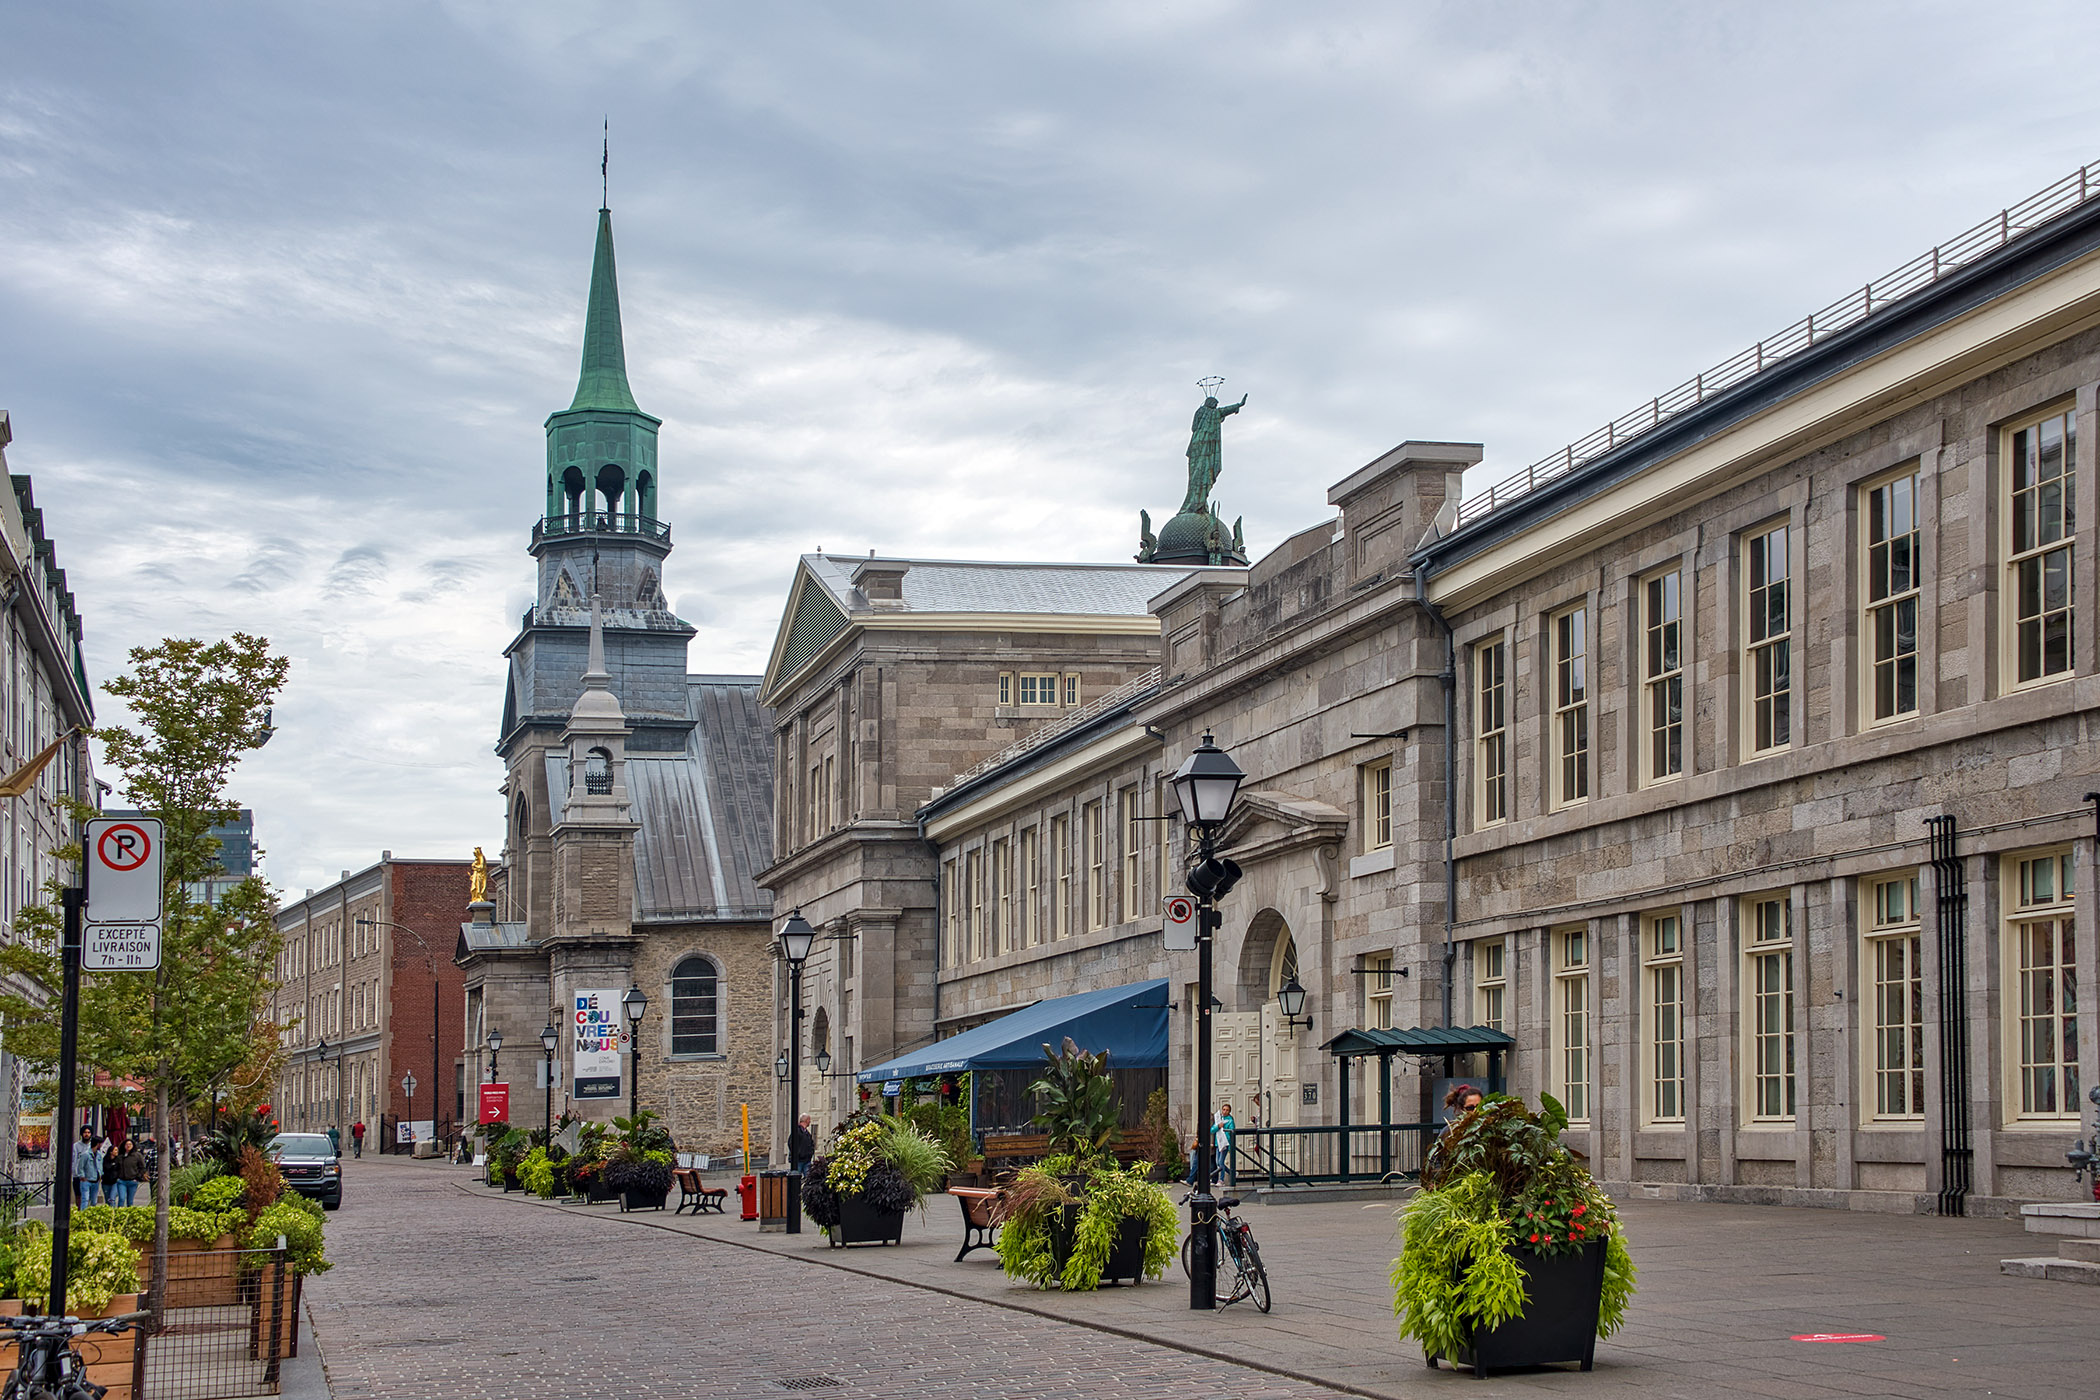 By the 'Bonsecours' Market